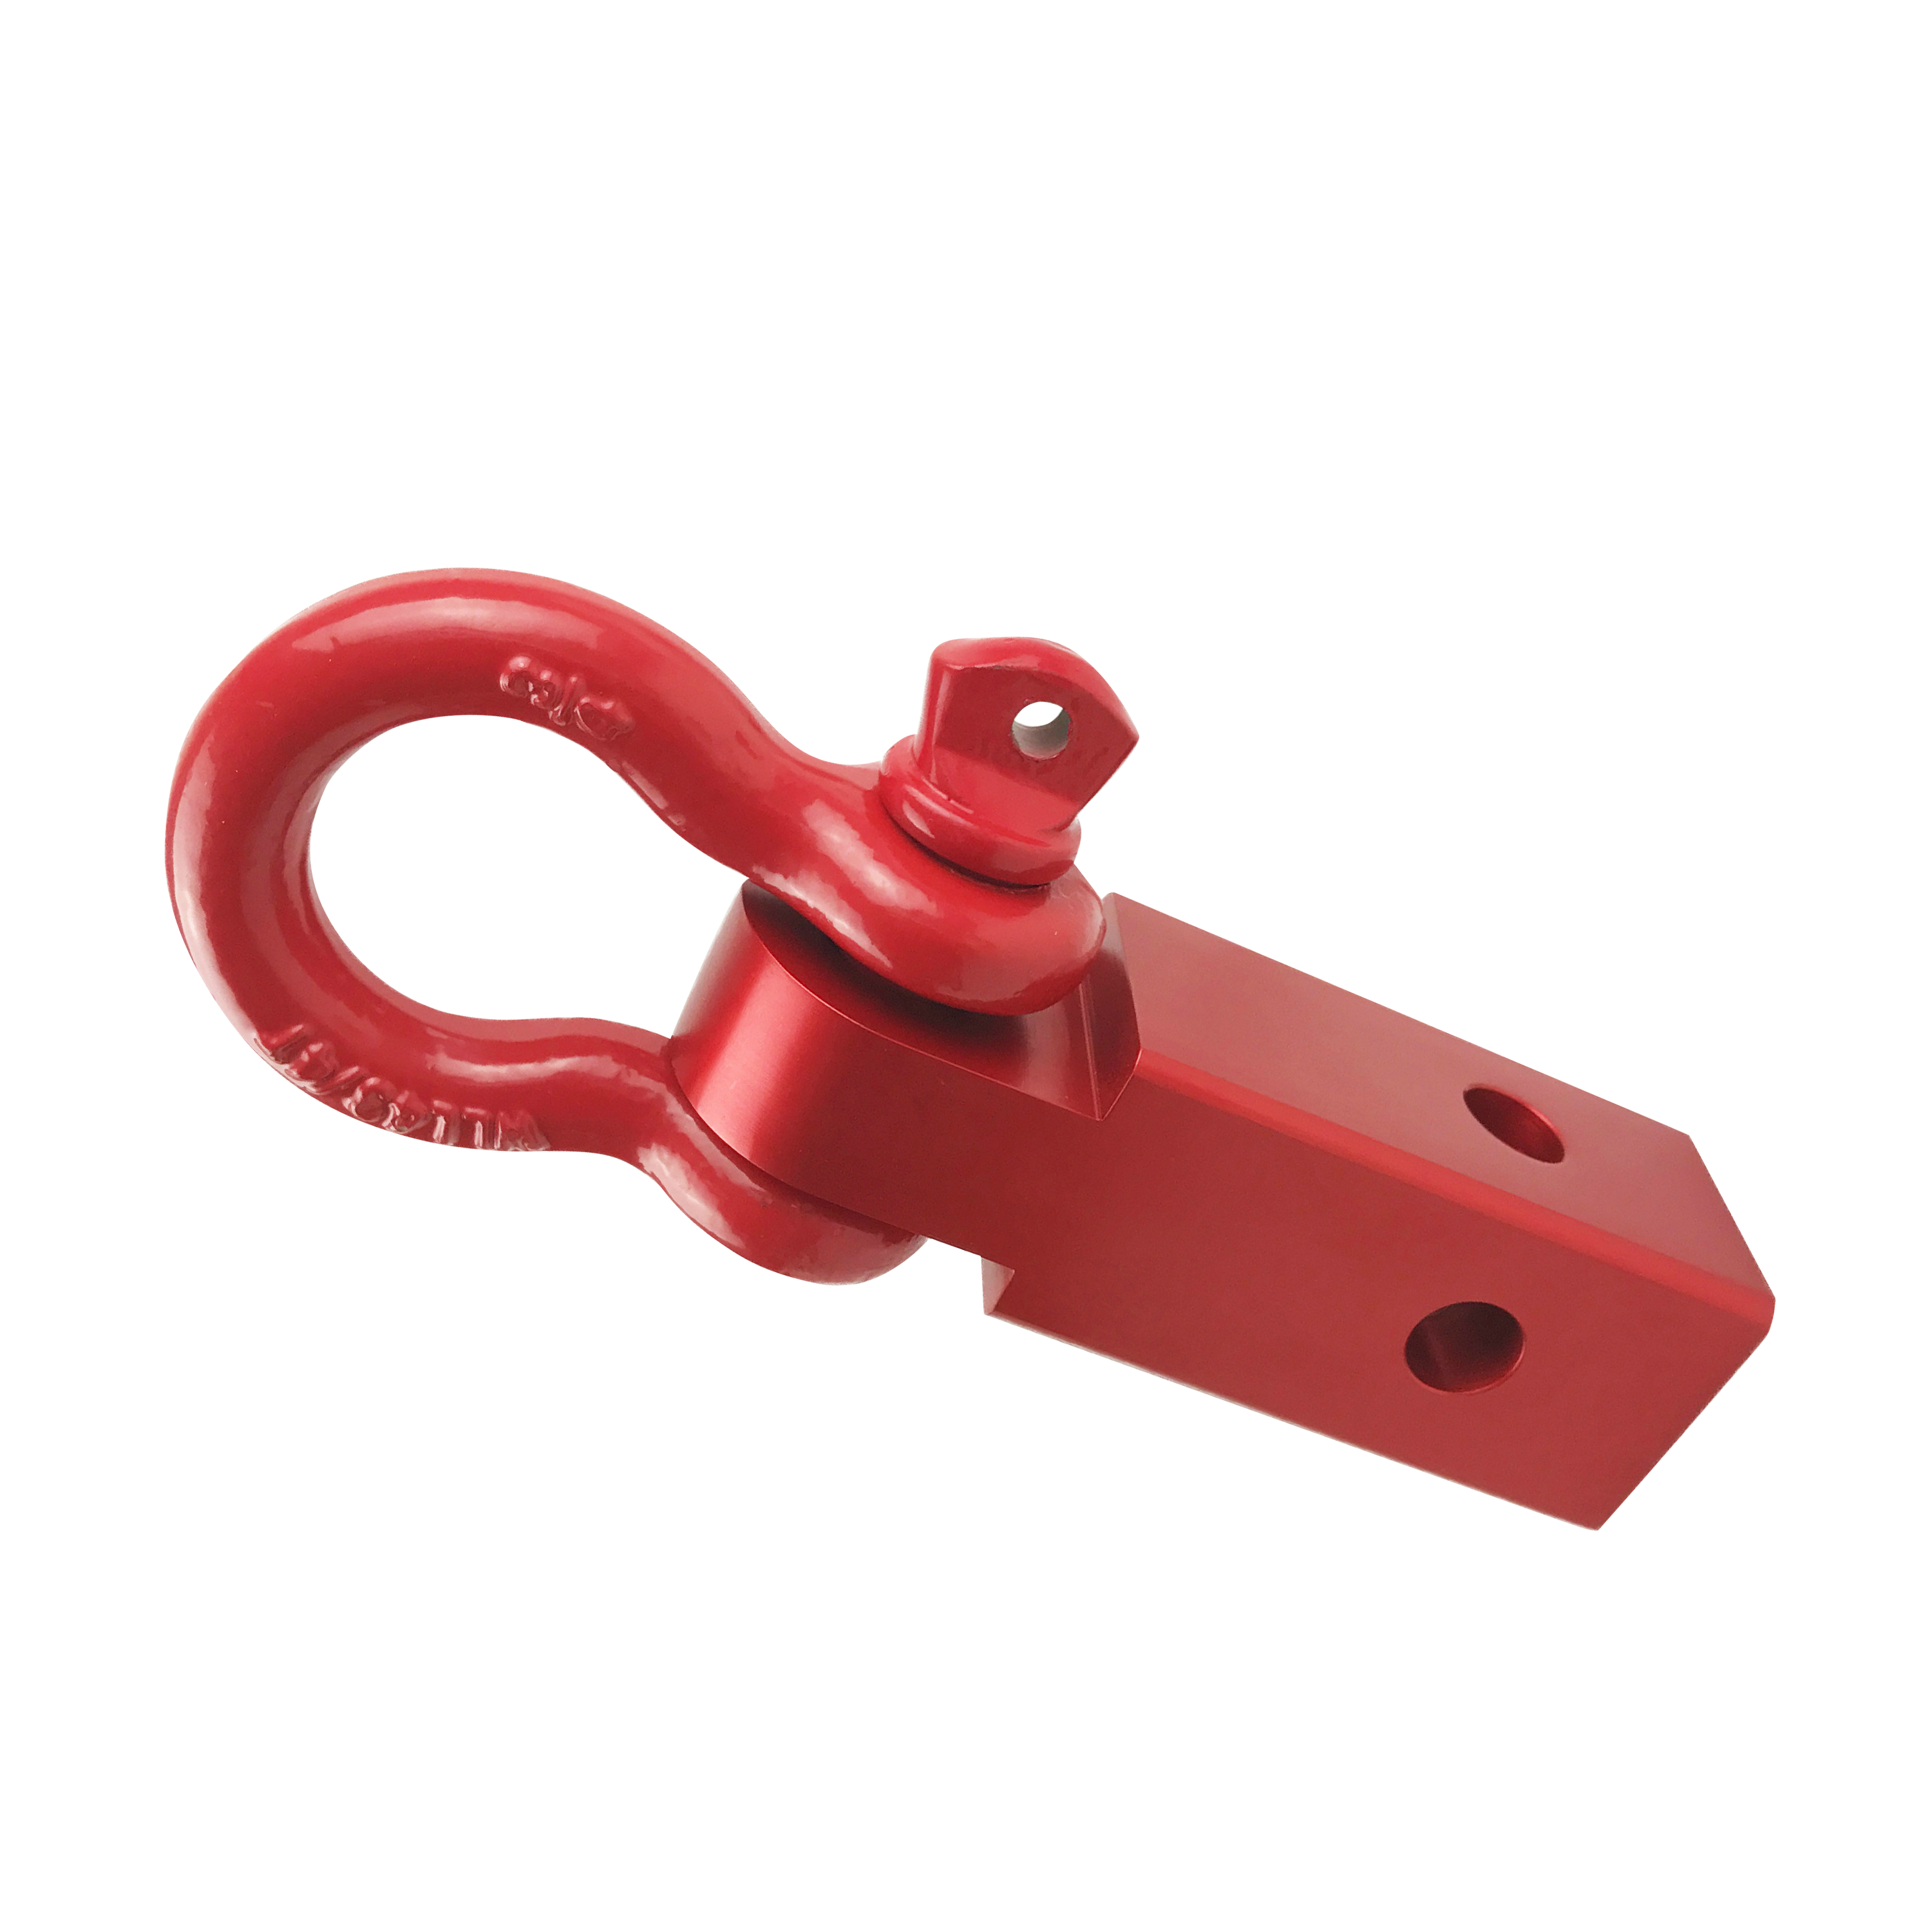 2 Inch Aluminum Steel Forging Shackle Hitch Reciever